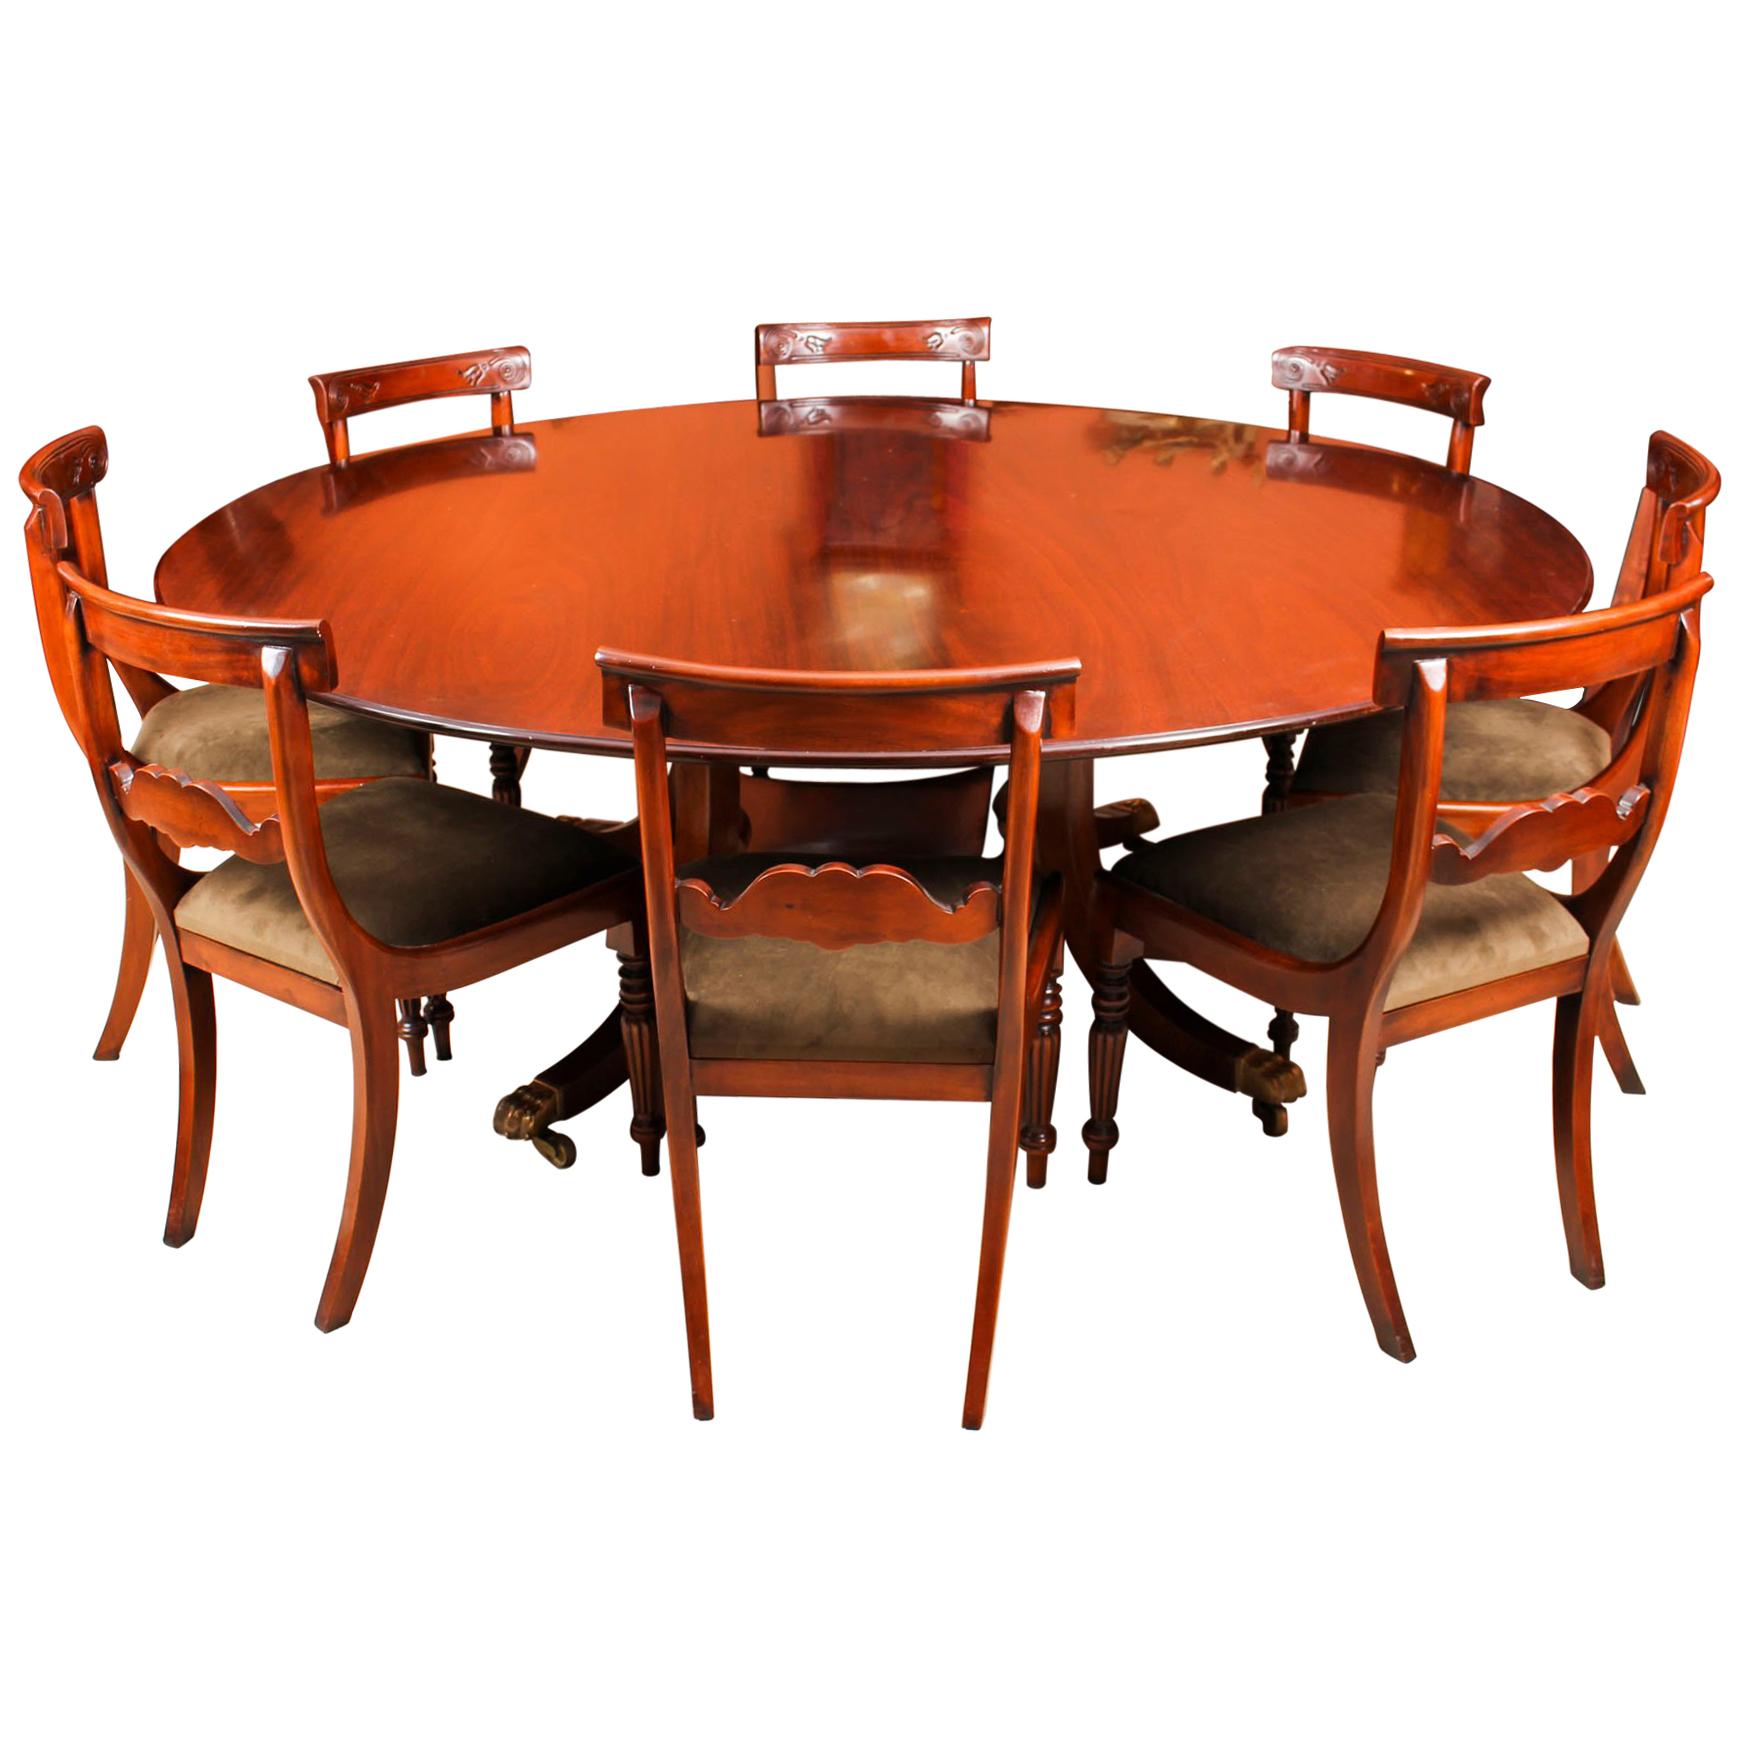 Vintage Round Table and 8 Bespoke Chairs William Tillman, 20th Century